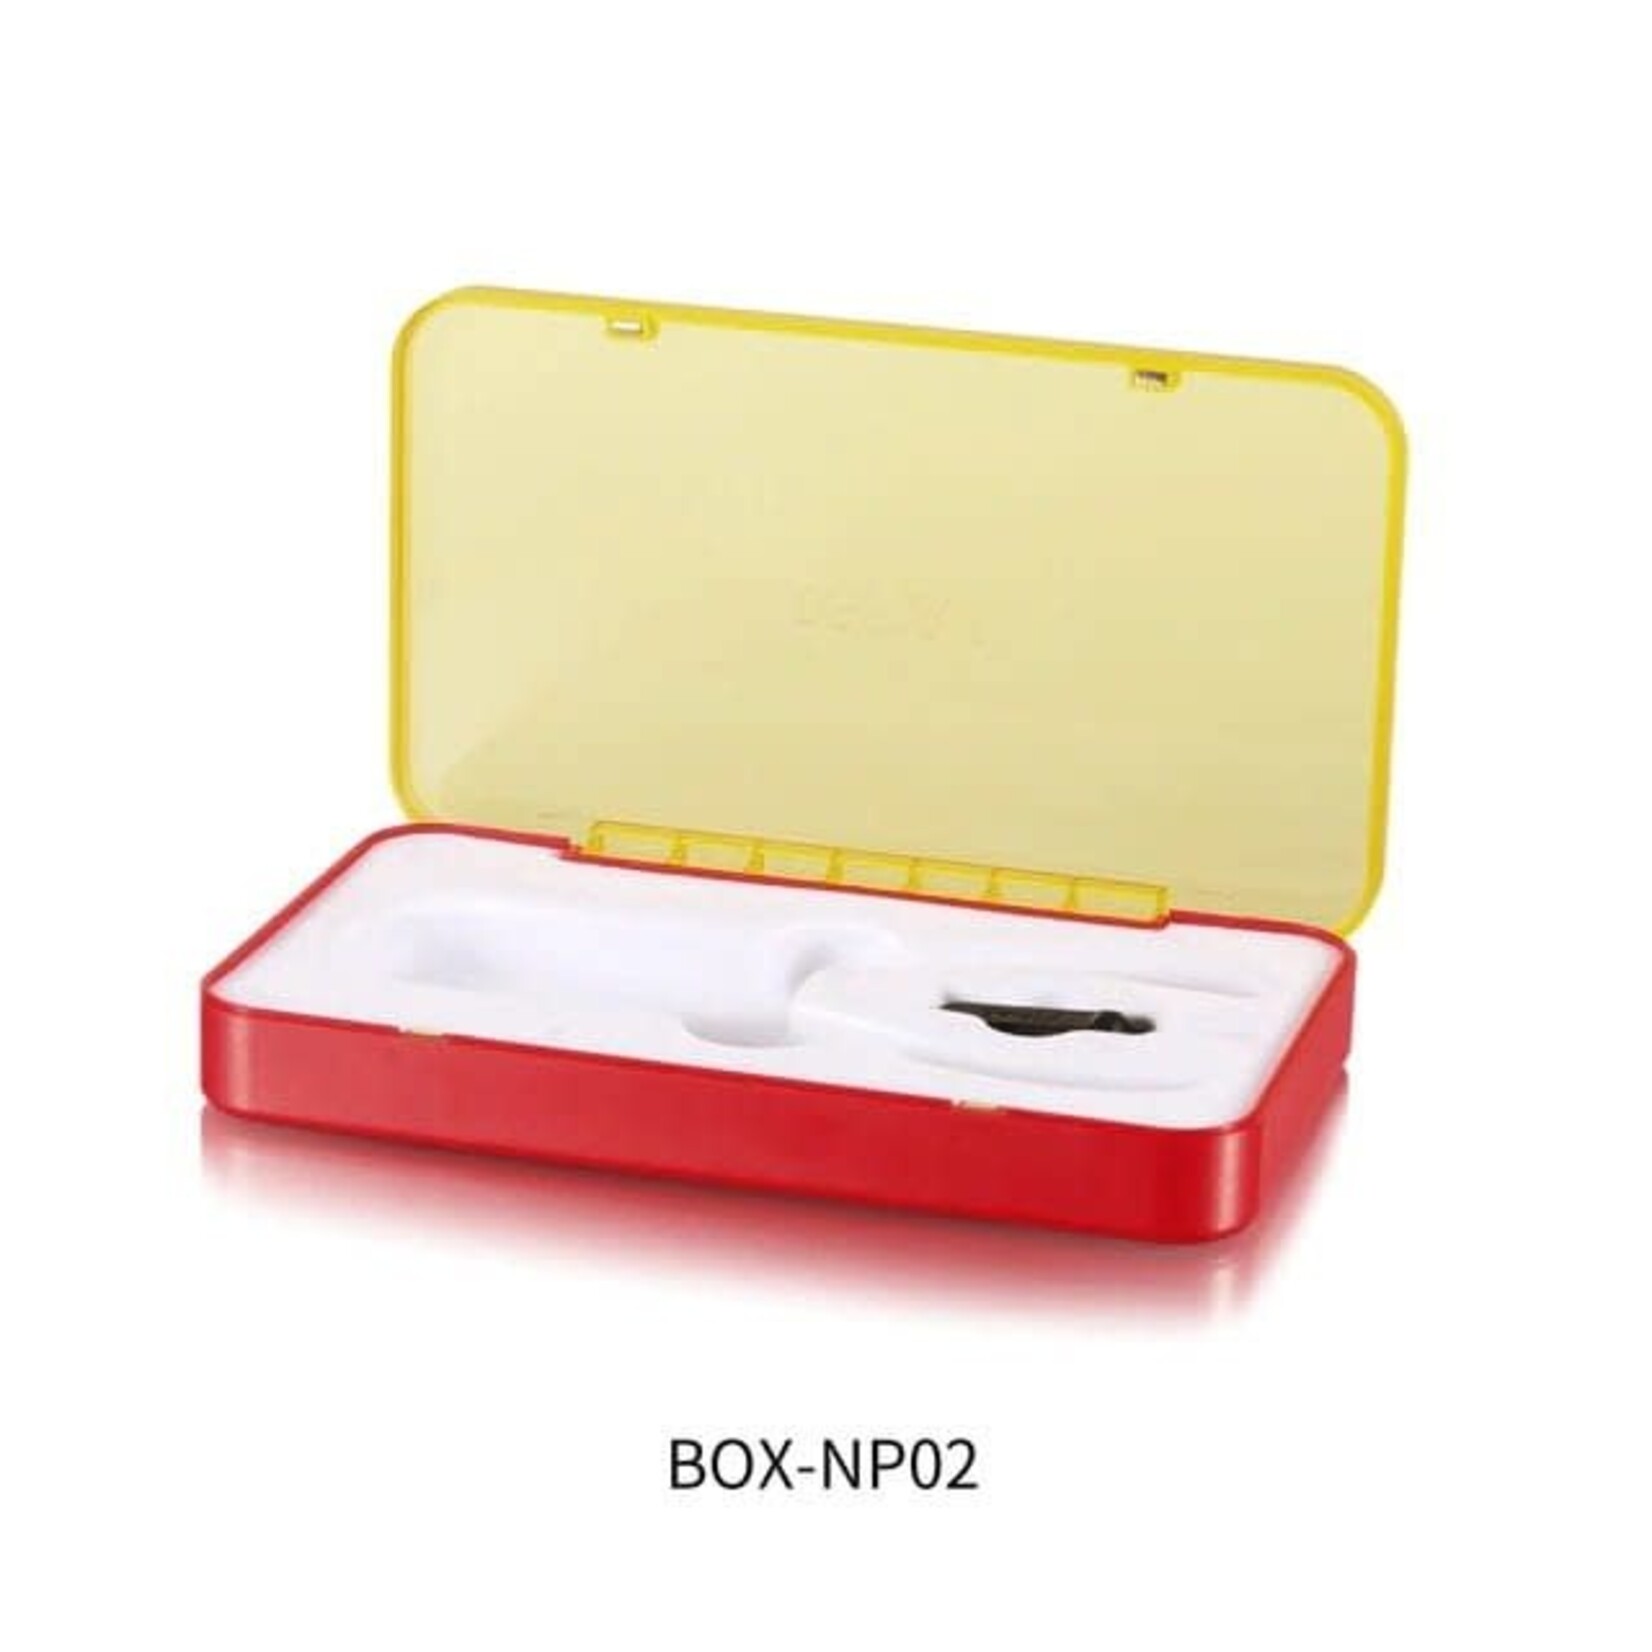 DSPIAE DS-BOX-NP02 DSPIAE Storage Case For Nipper (Red/Yellow)